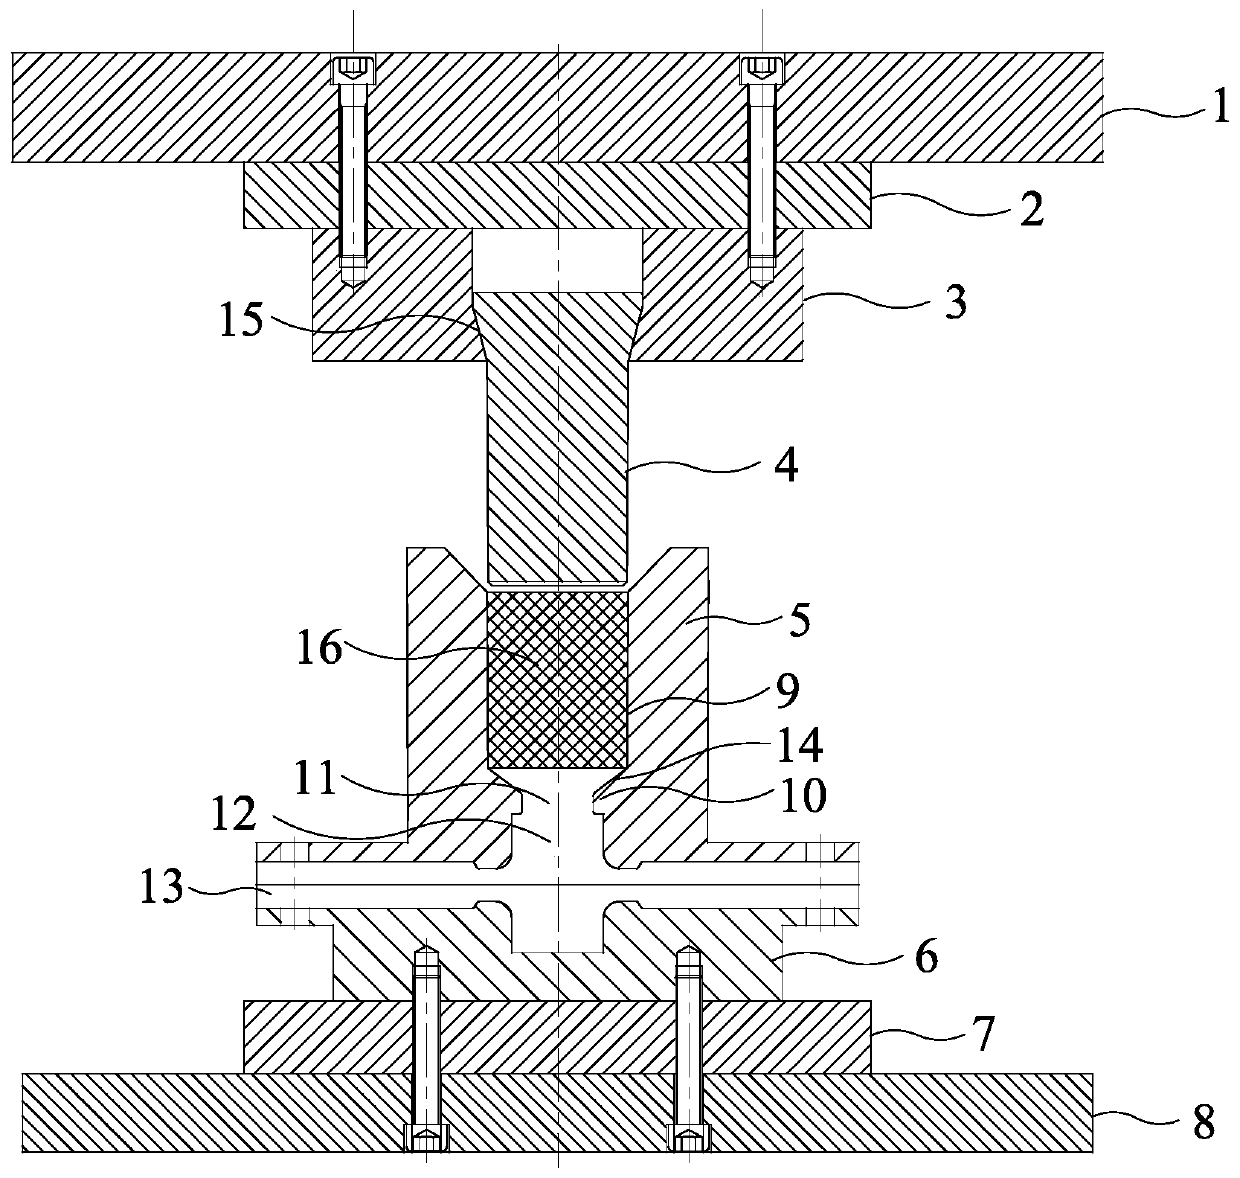 Large-deformation composite extrusion preparation method for magnesium alloy profile for vertical hydraulic machine